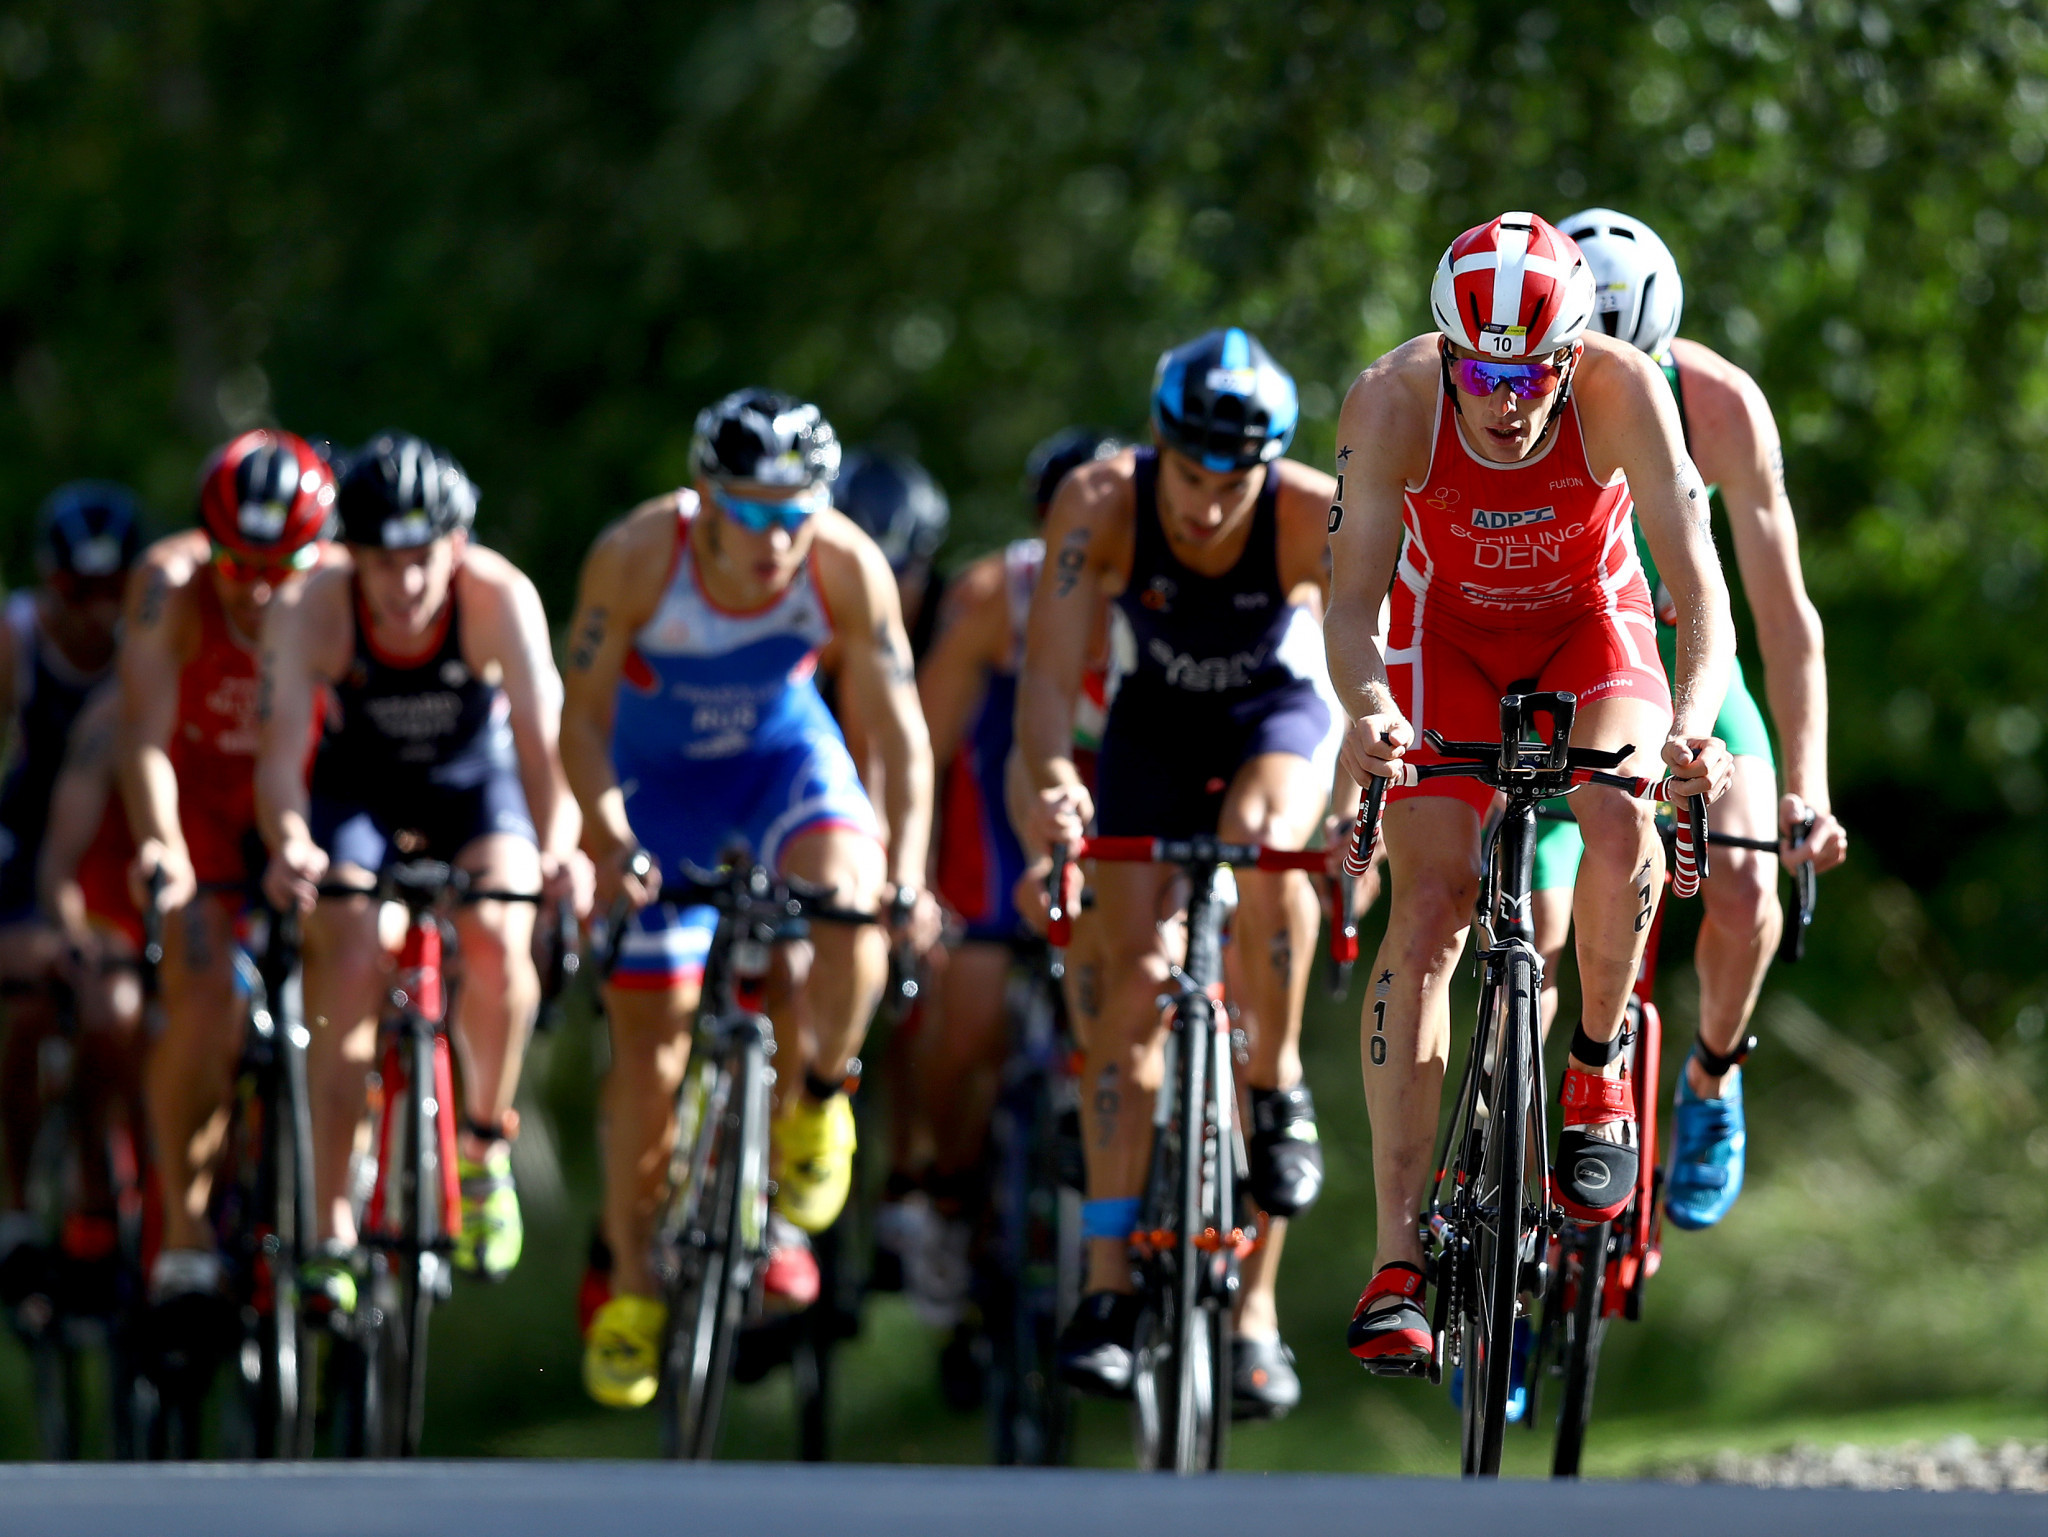 The World Triathlon Multisport Championships are set to take place in Townsville in August 2022 ©Getty Images